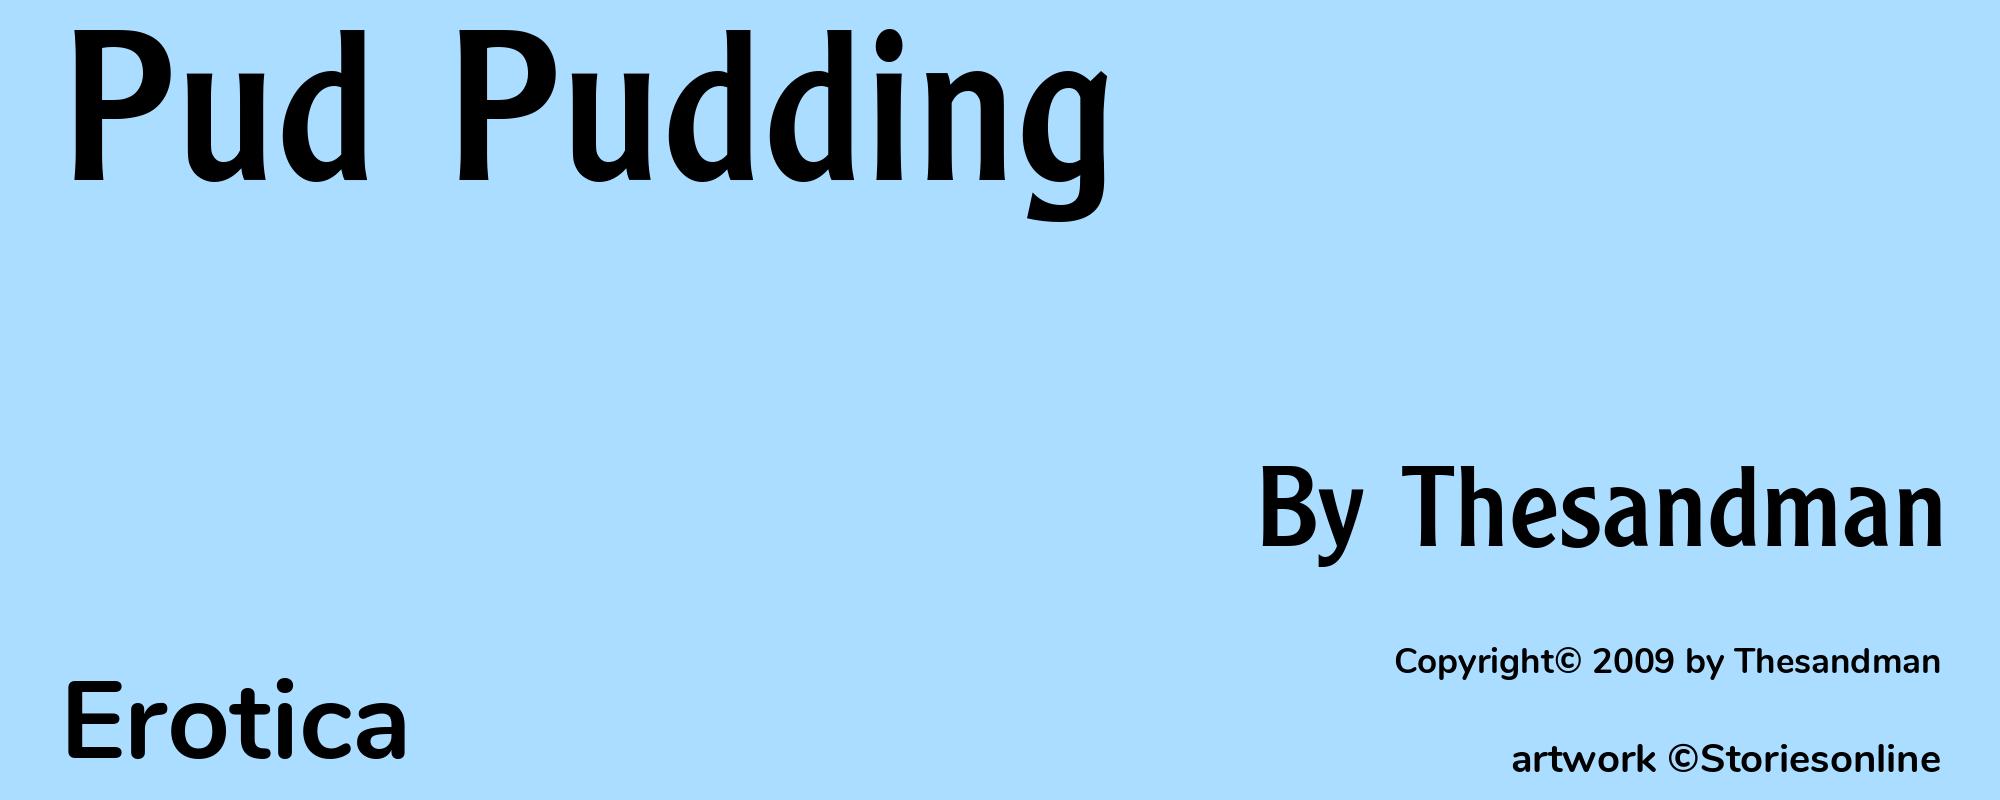 Pud Pudding - Cover